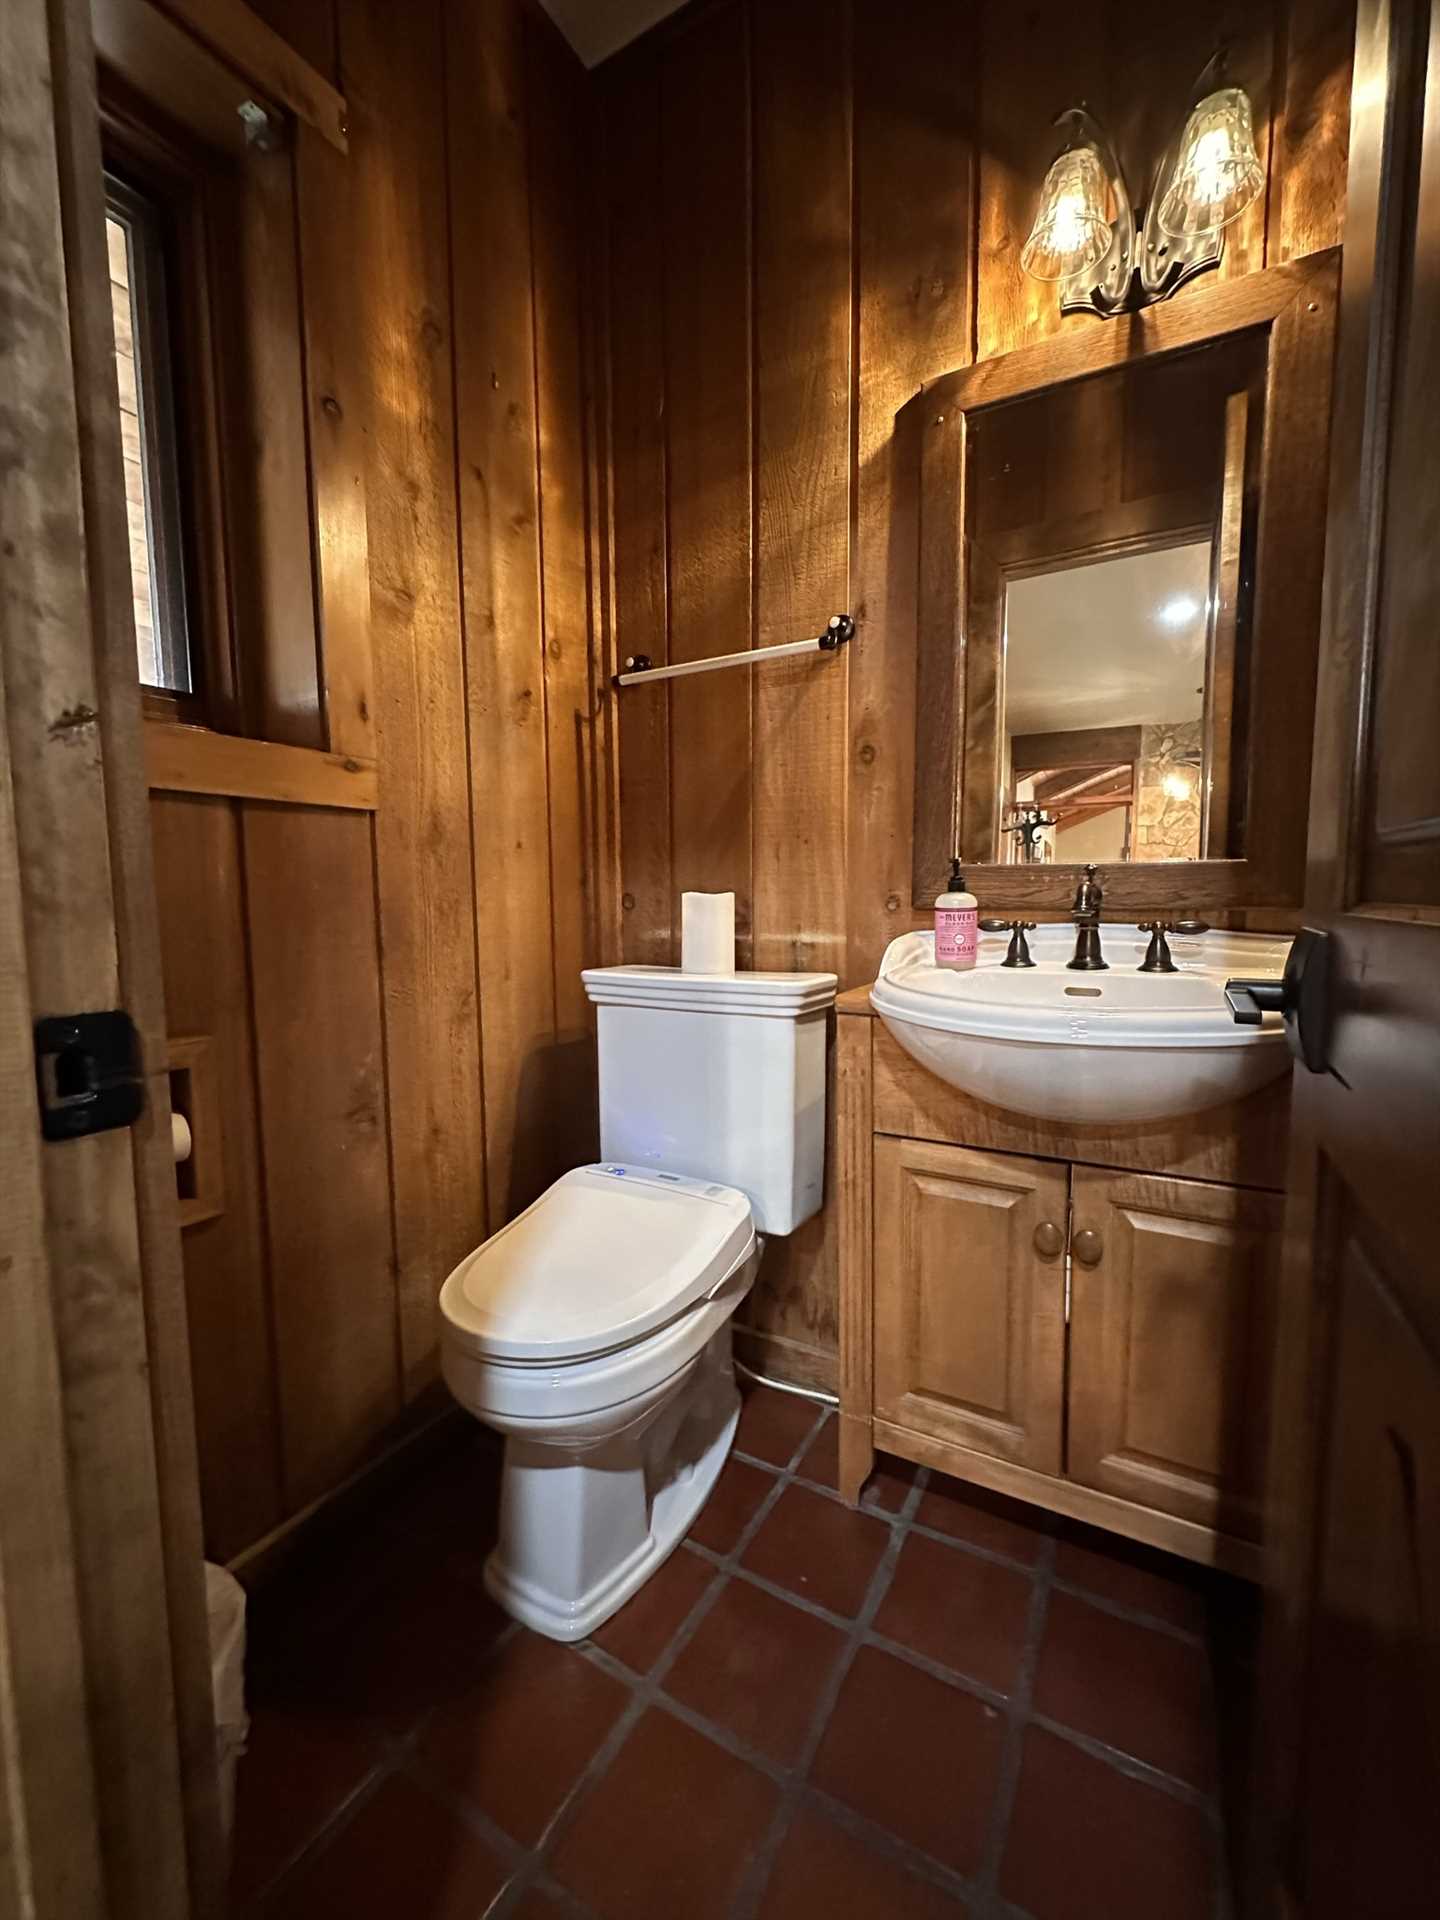                                                 You'll find an additional half-bath downstairs for your convenience!